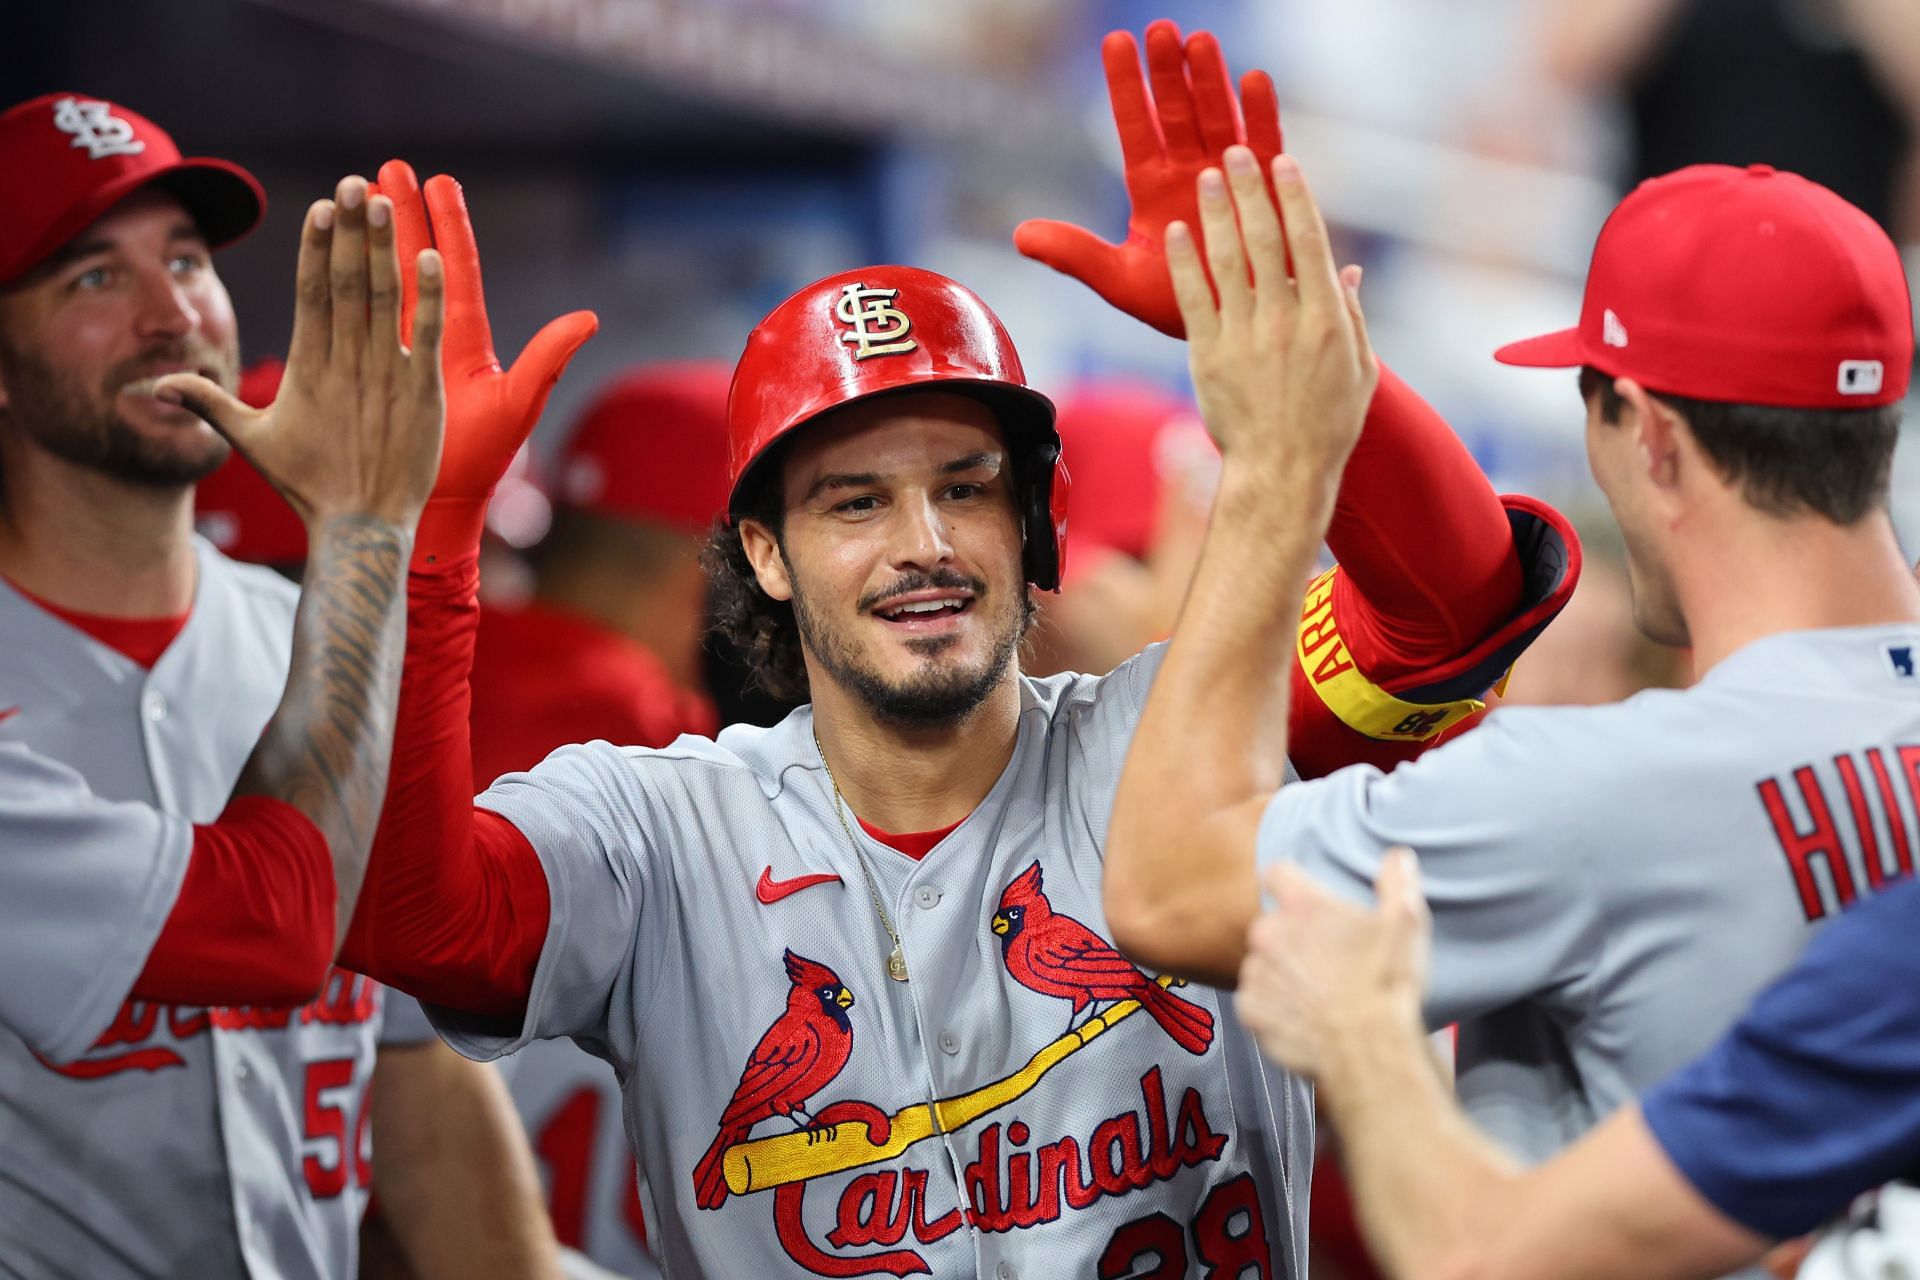 St. Louis Cardinals 3B Nolan Arenado showed off his fielding skills with a slick double play.